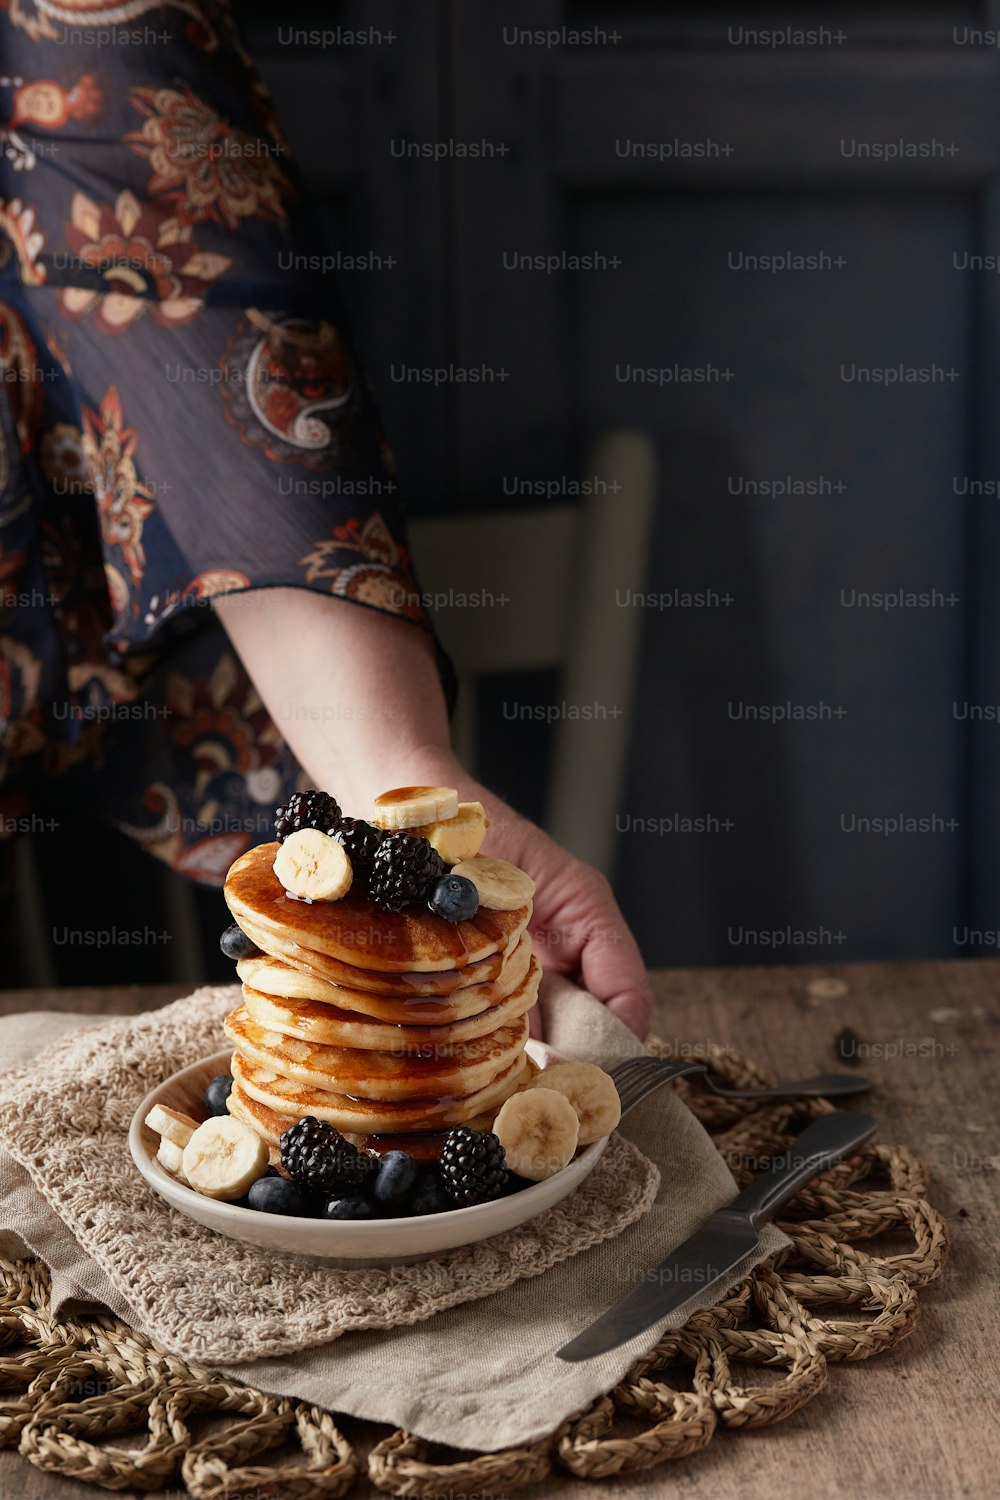 a stack of pancakes topped with bananas and blackberries